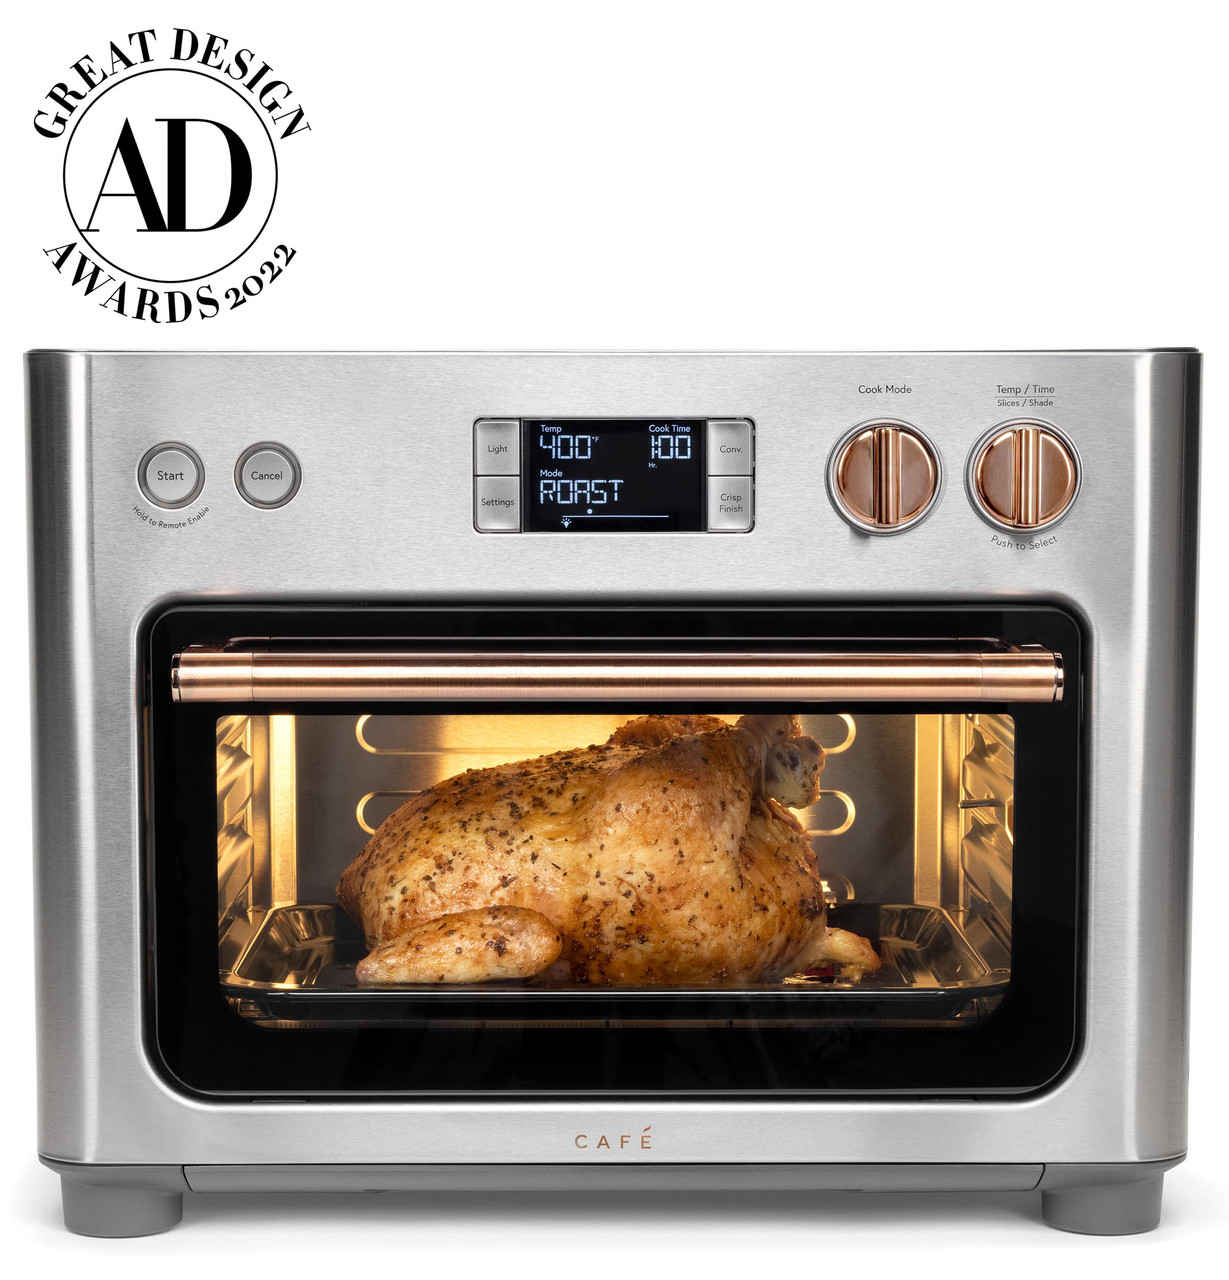 16-in-1 Air Fryer Oven, 13 Quart Airfryer Toaster Oven Combo